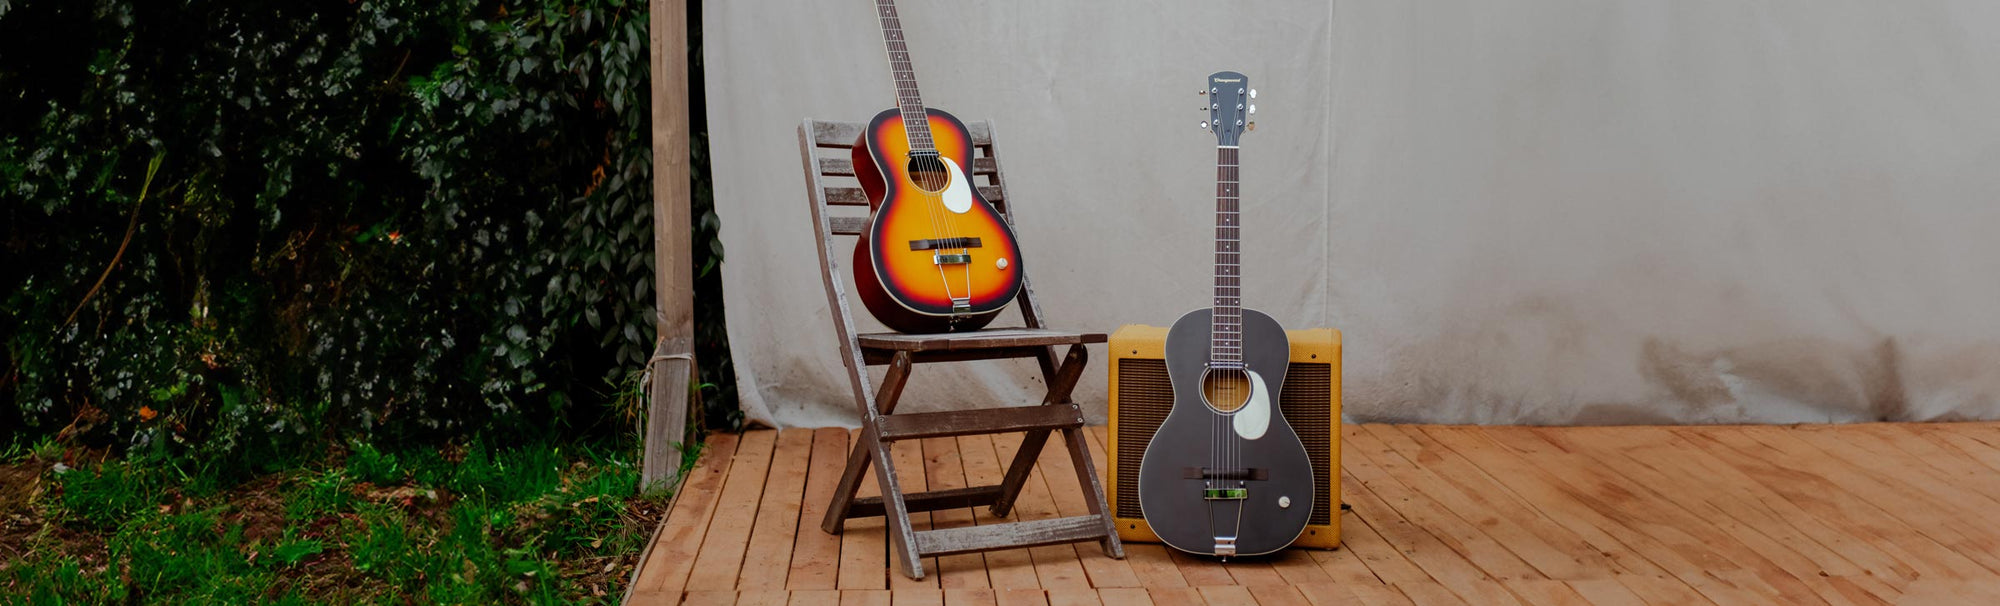 Two parlor guitars on an outdoor stage